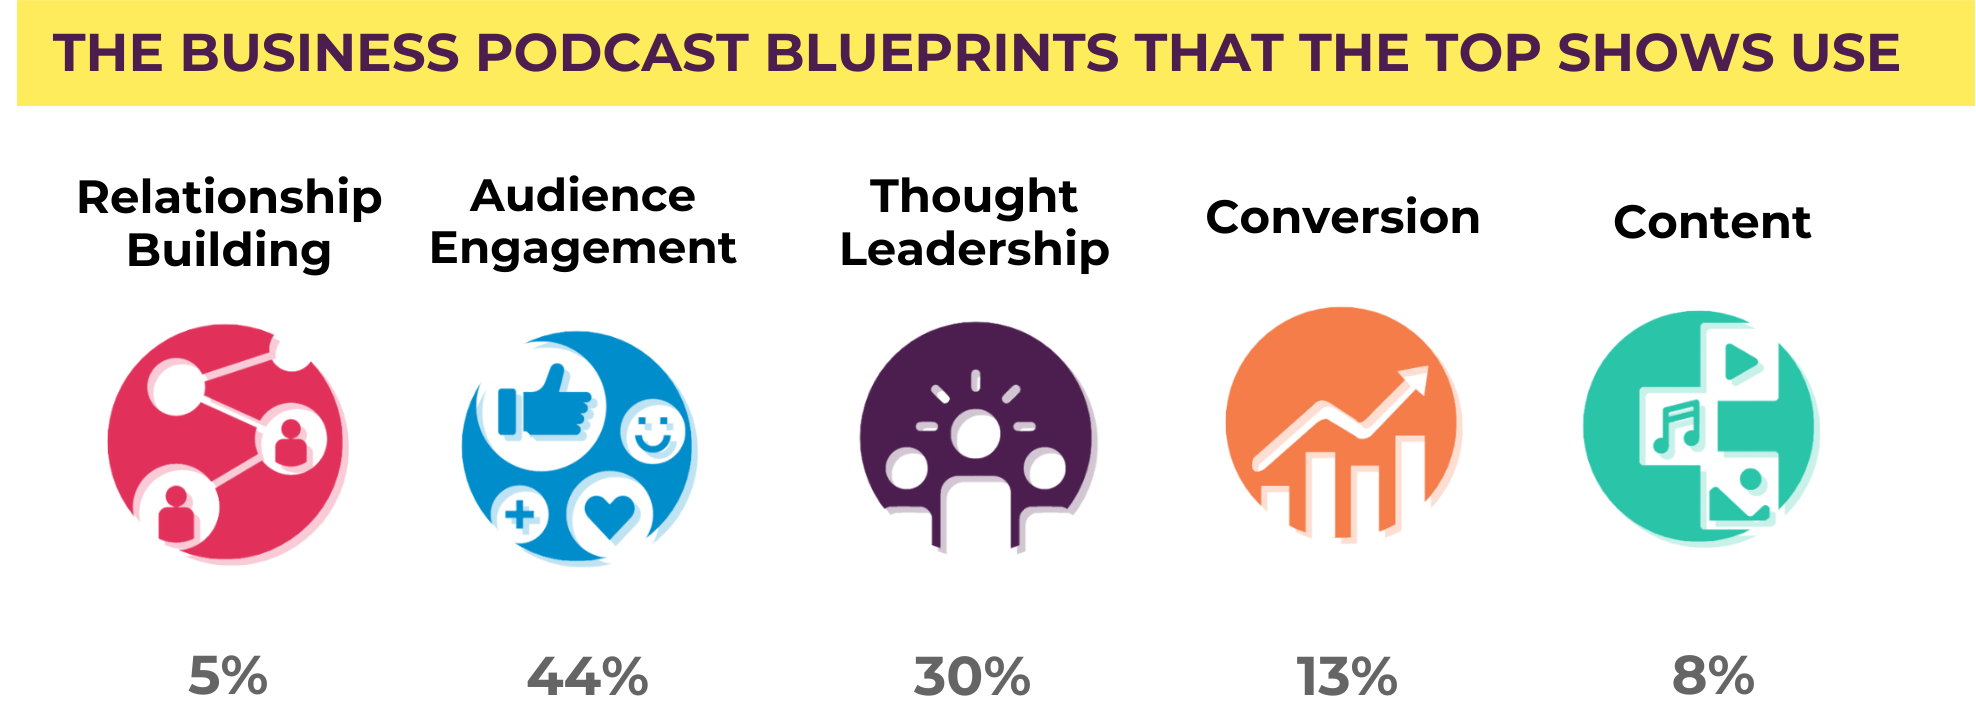 the business podcast blueprints that the top 100 business podcasts use